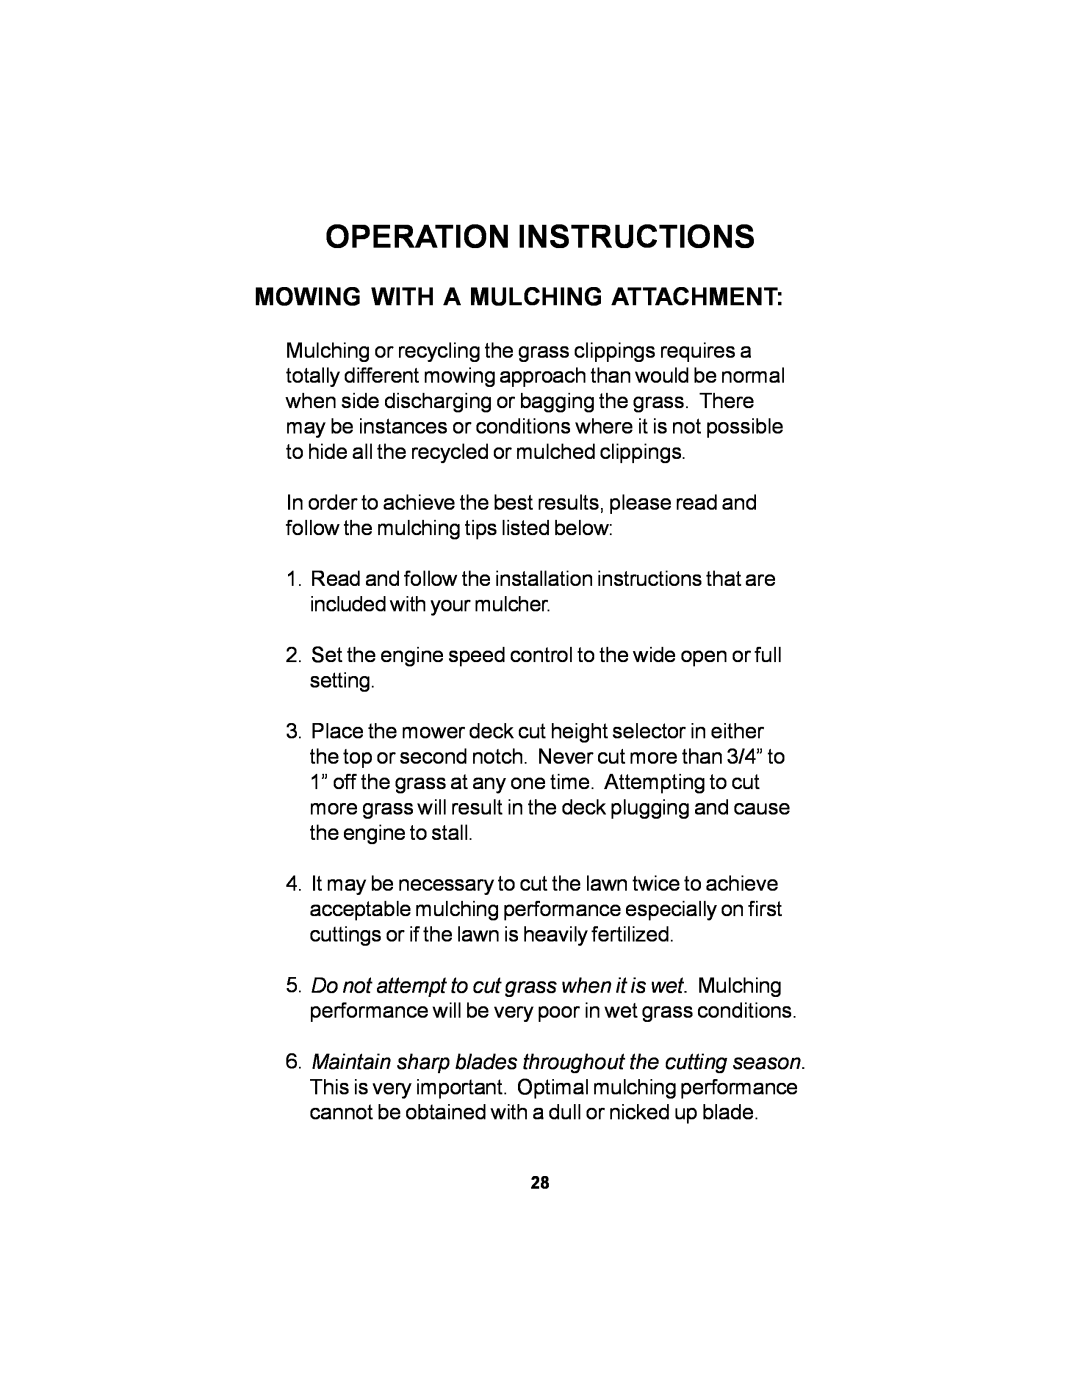 Dixon 36 manual Mowing With A Mulching Attachment, Operation Instructions 